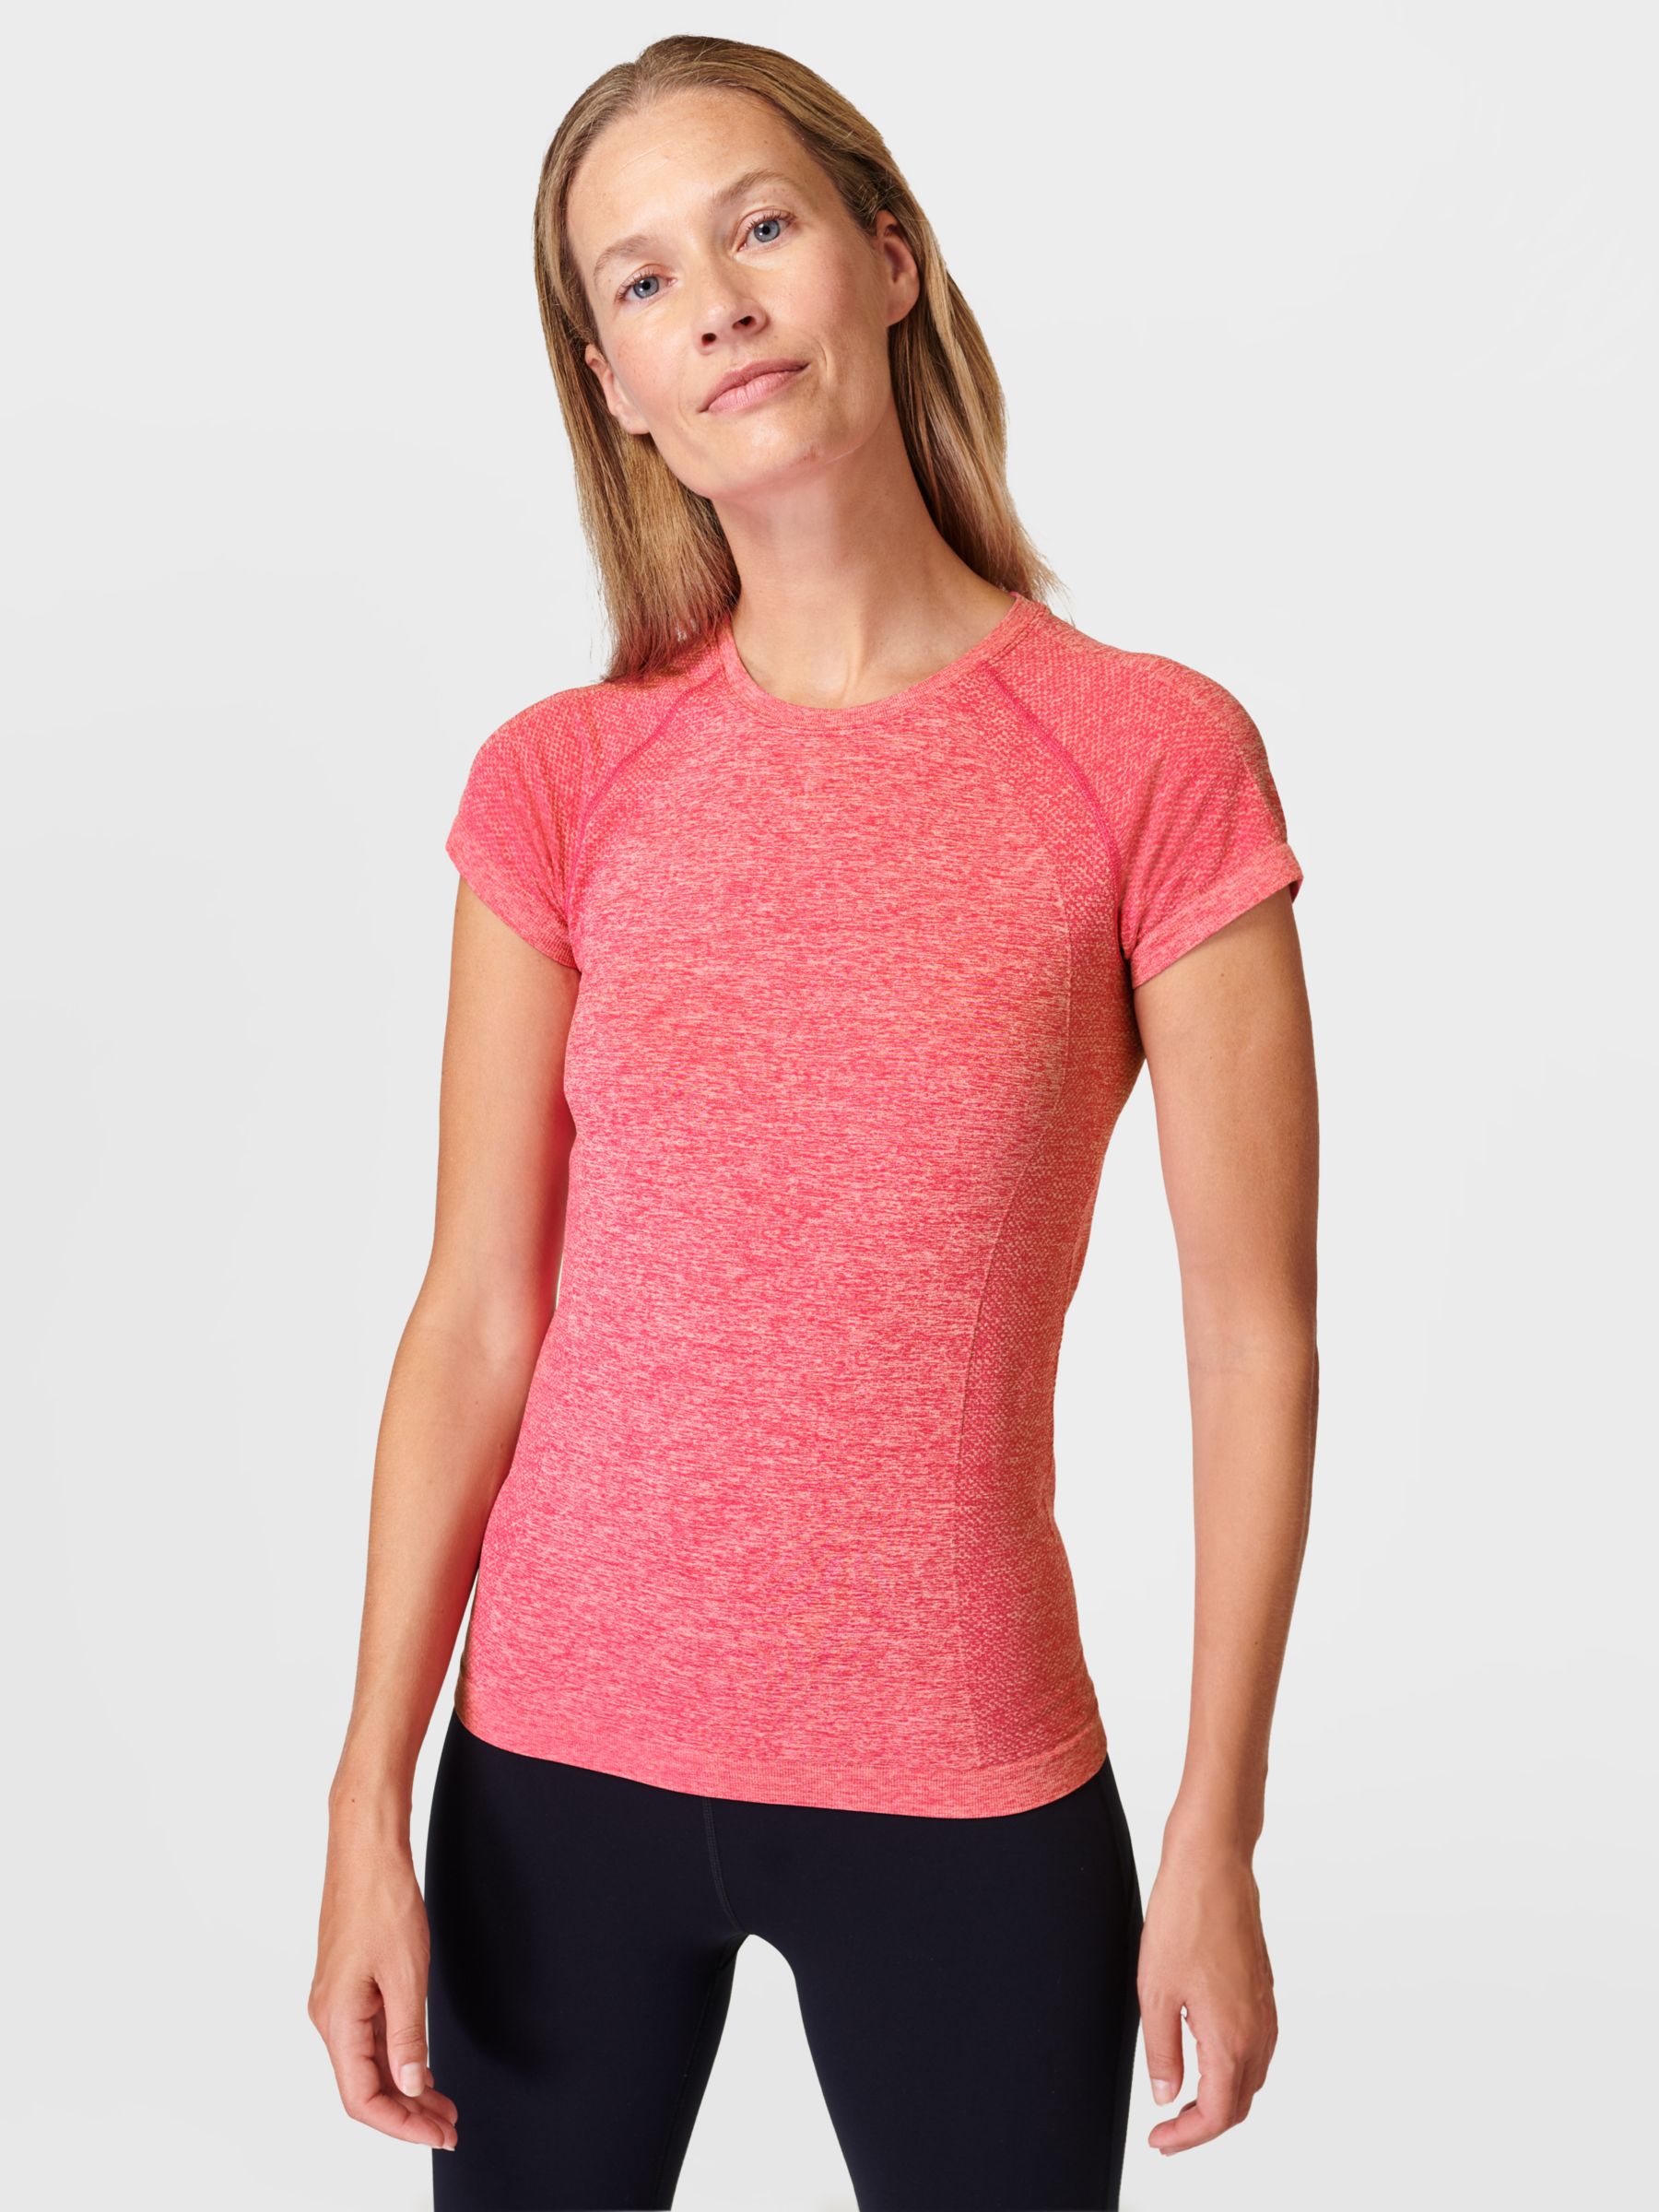 John Lewis adds Sweaty Betty to click & collect offer